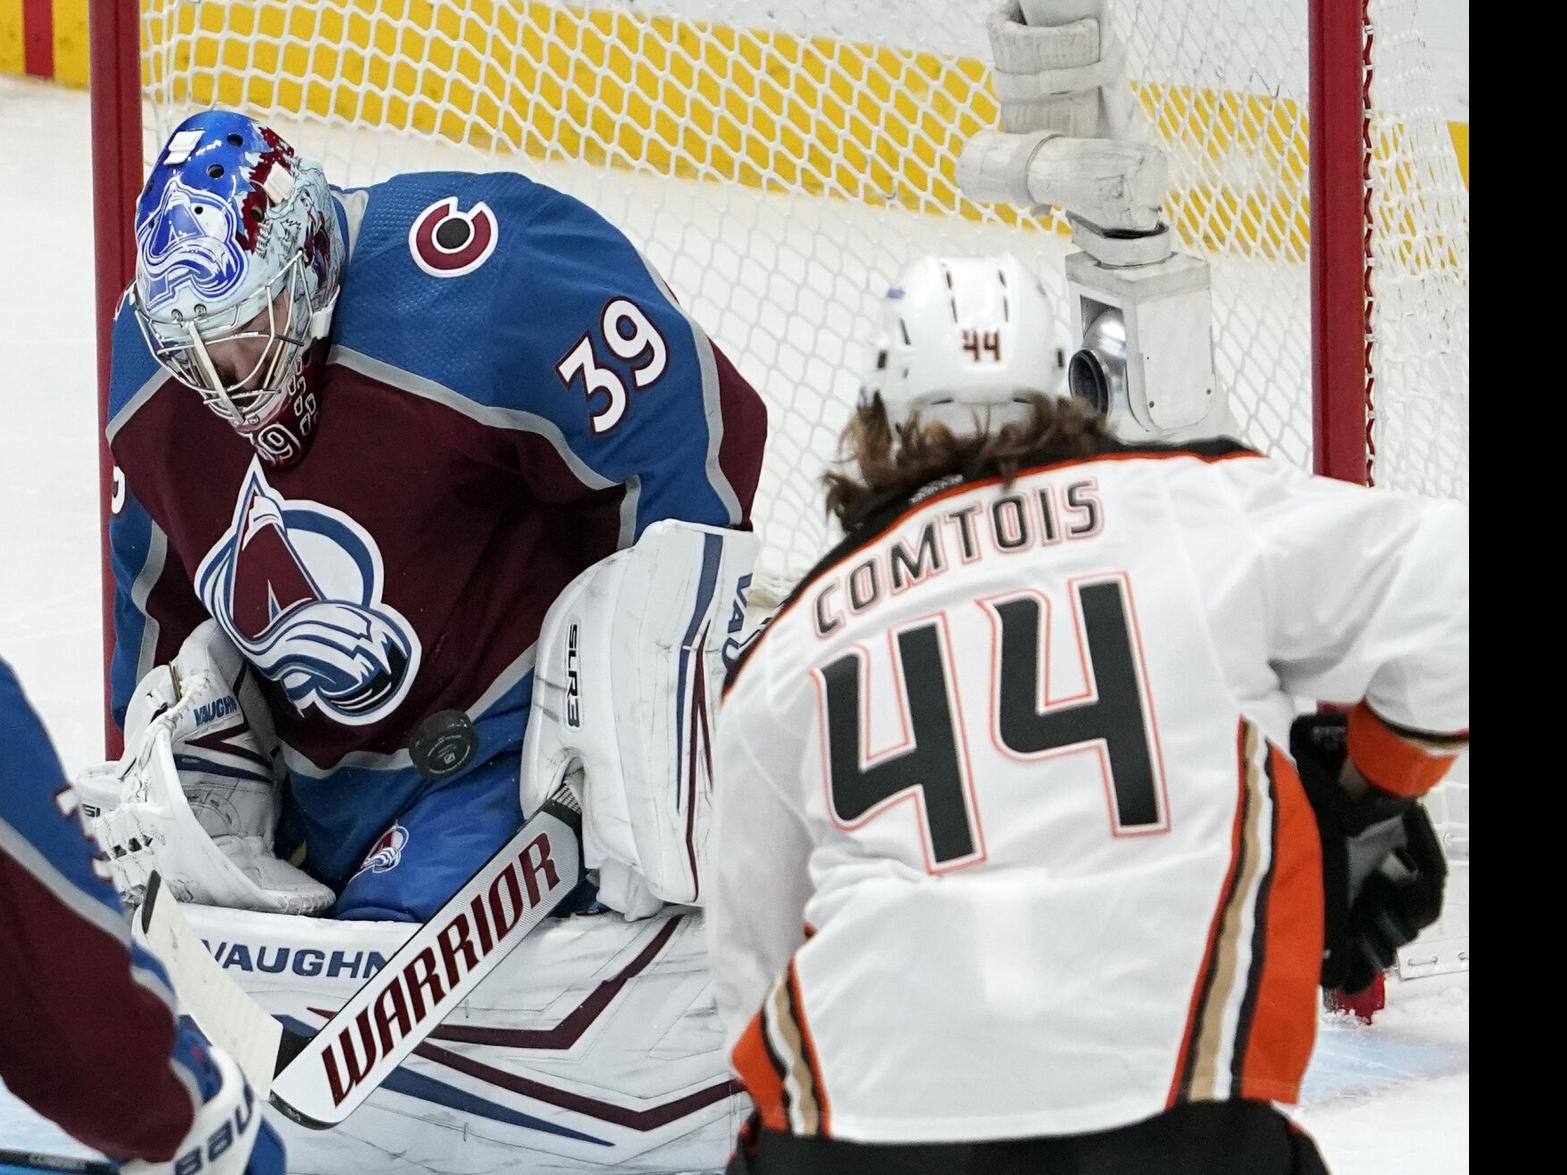 Analysis: Pavel Francouz appears to be the Avalanche's No. 2